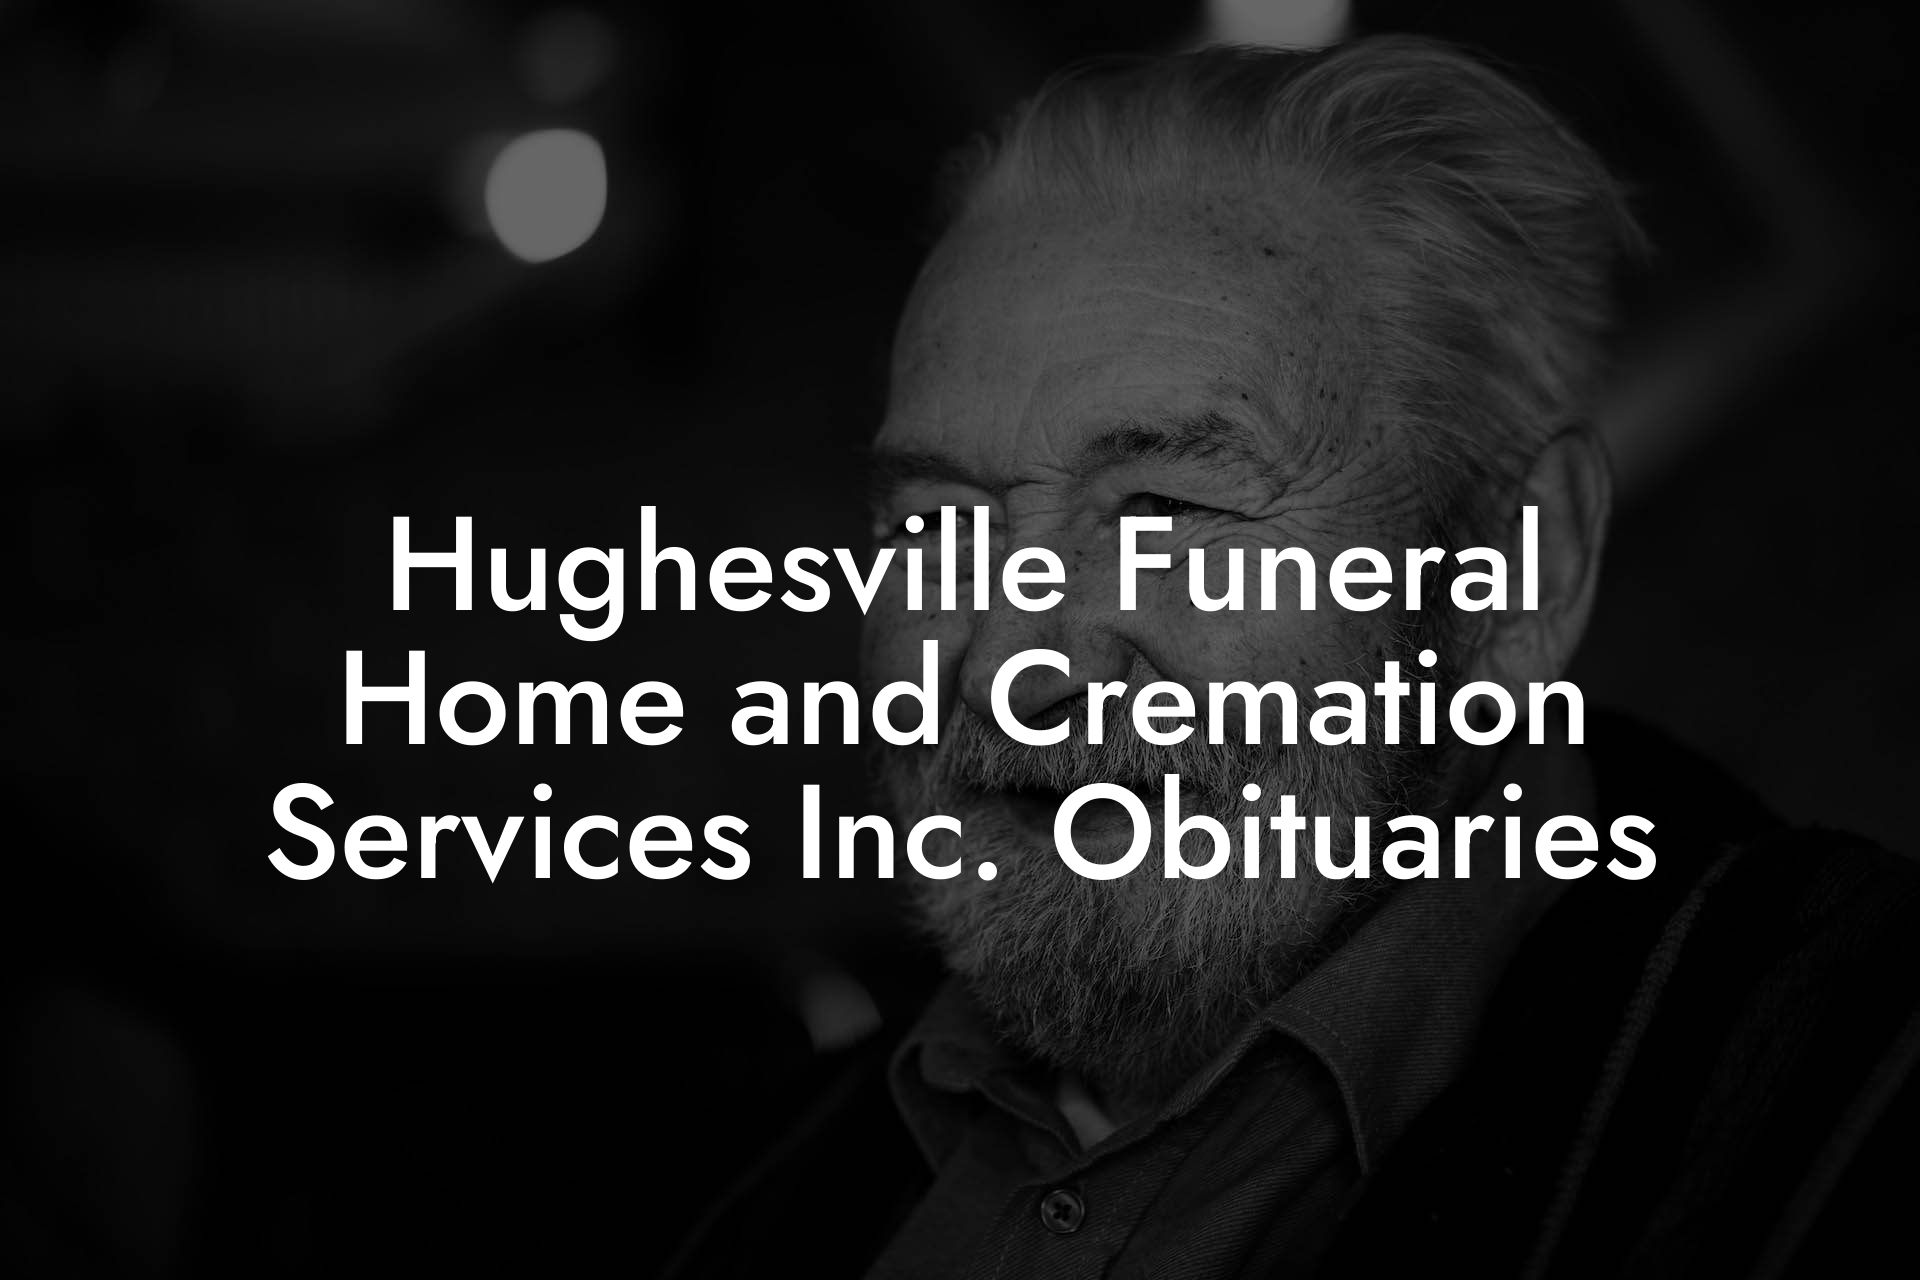 Hughesville Funeral Home and Cremation Services Inc. Obituaries